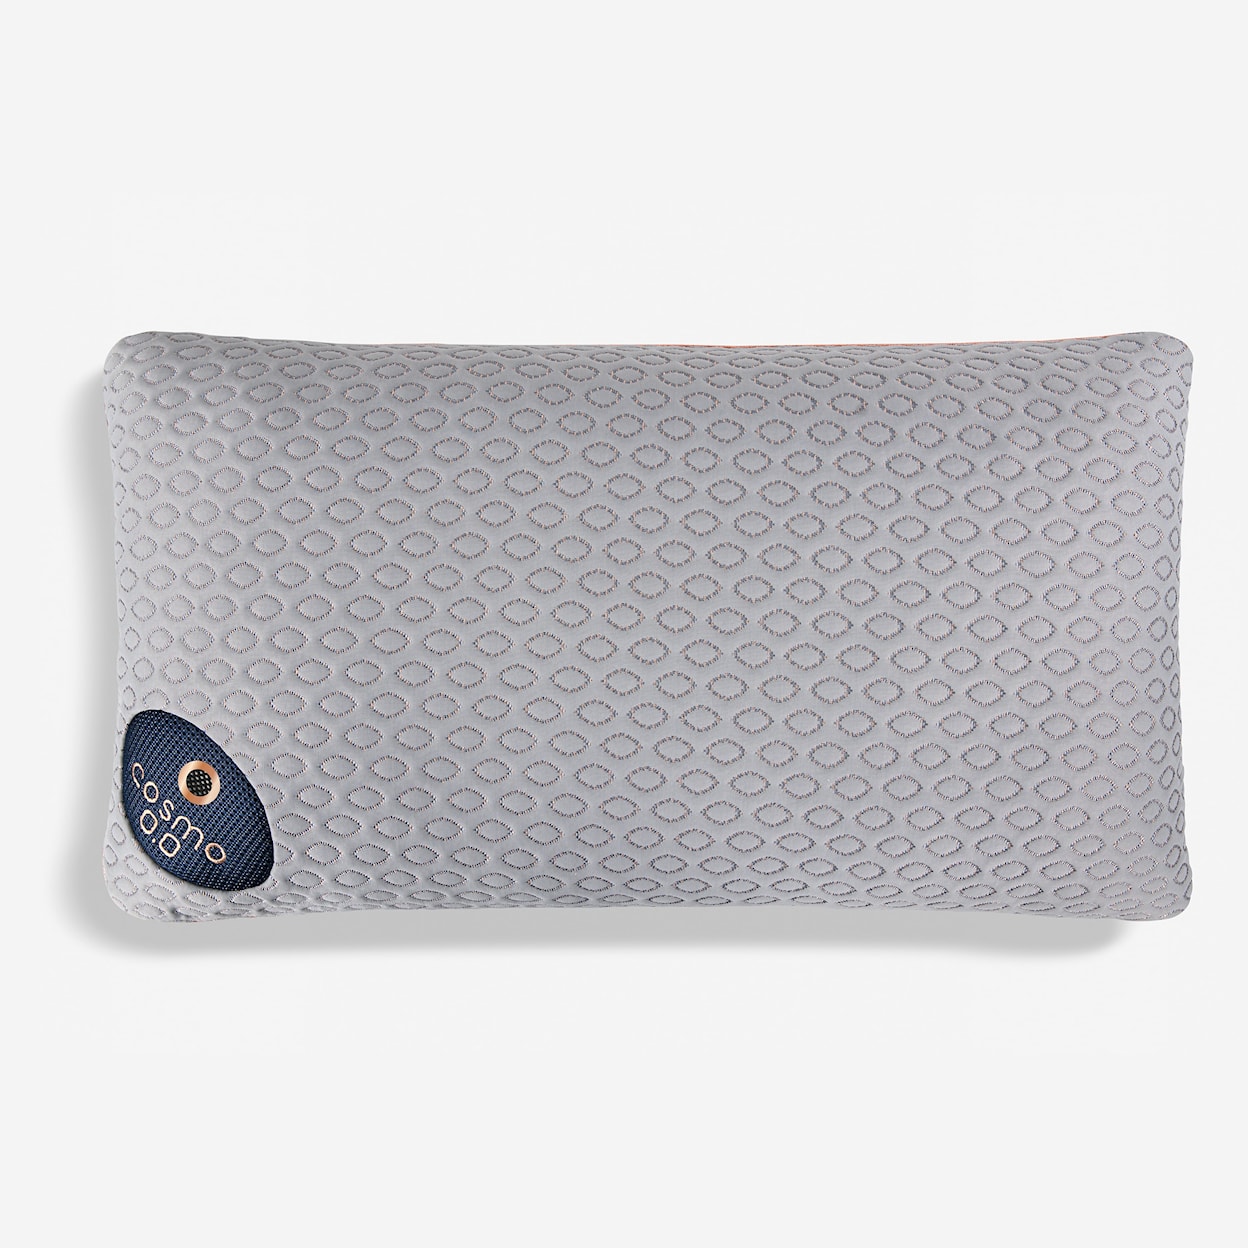 Bedgear Cosmo Cosmo King Rectangle 0.0 Pillow